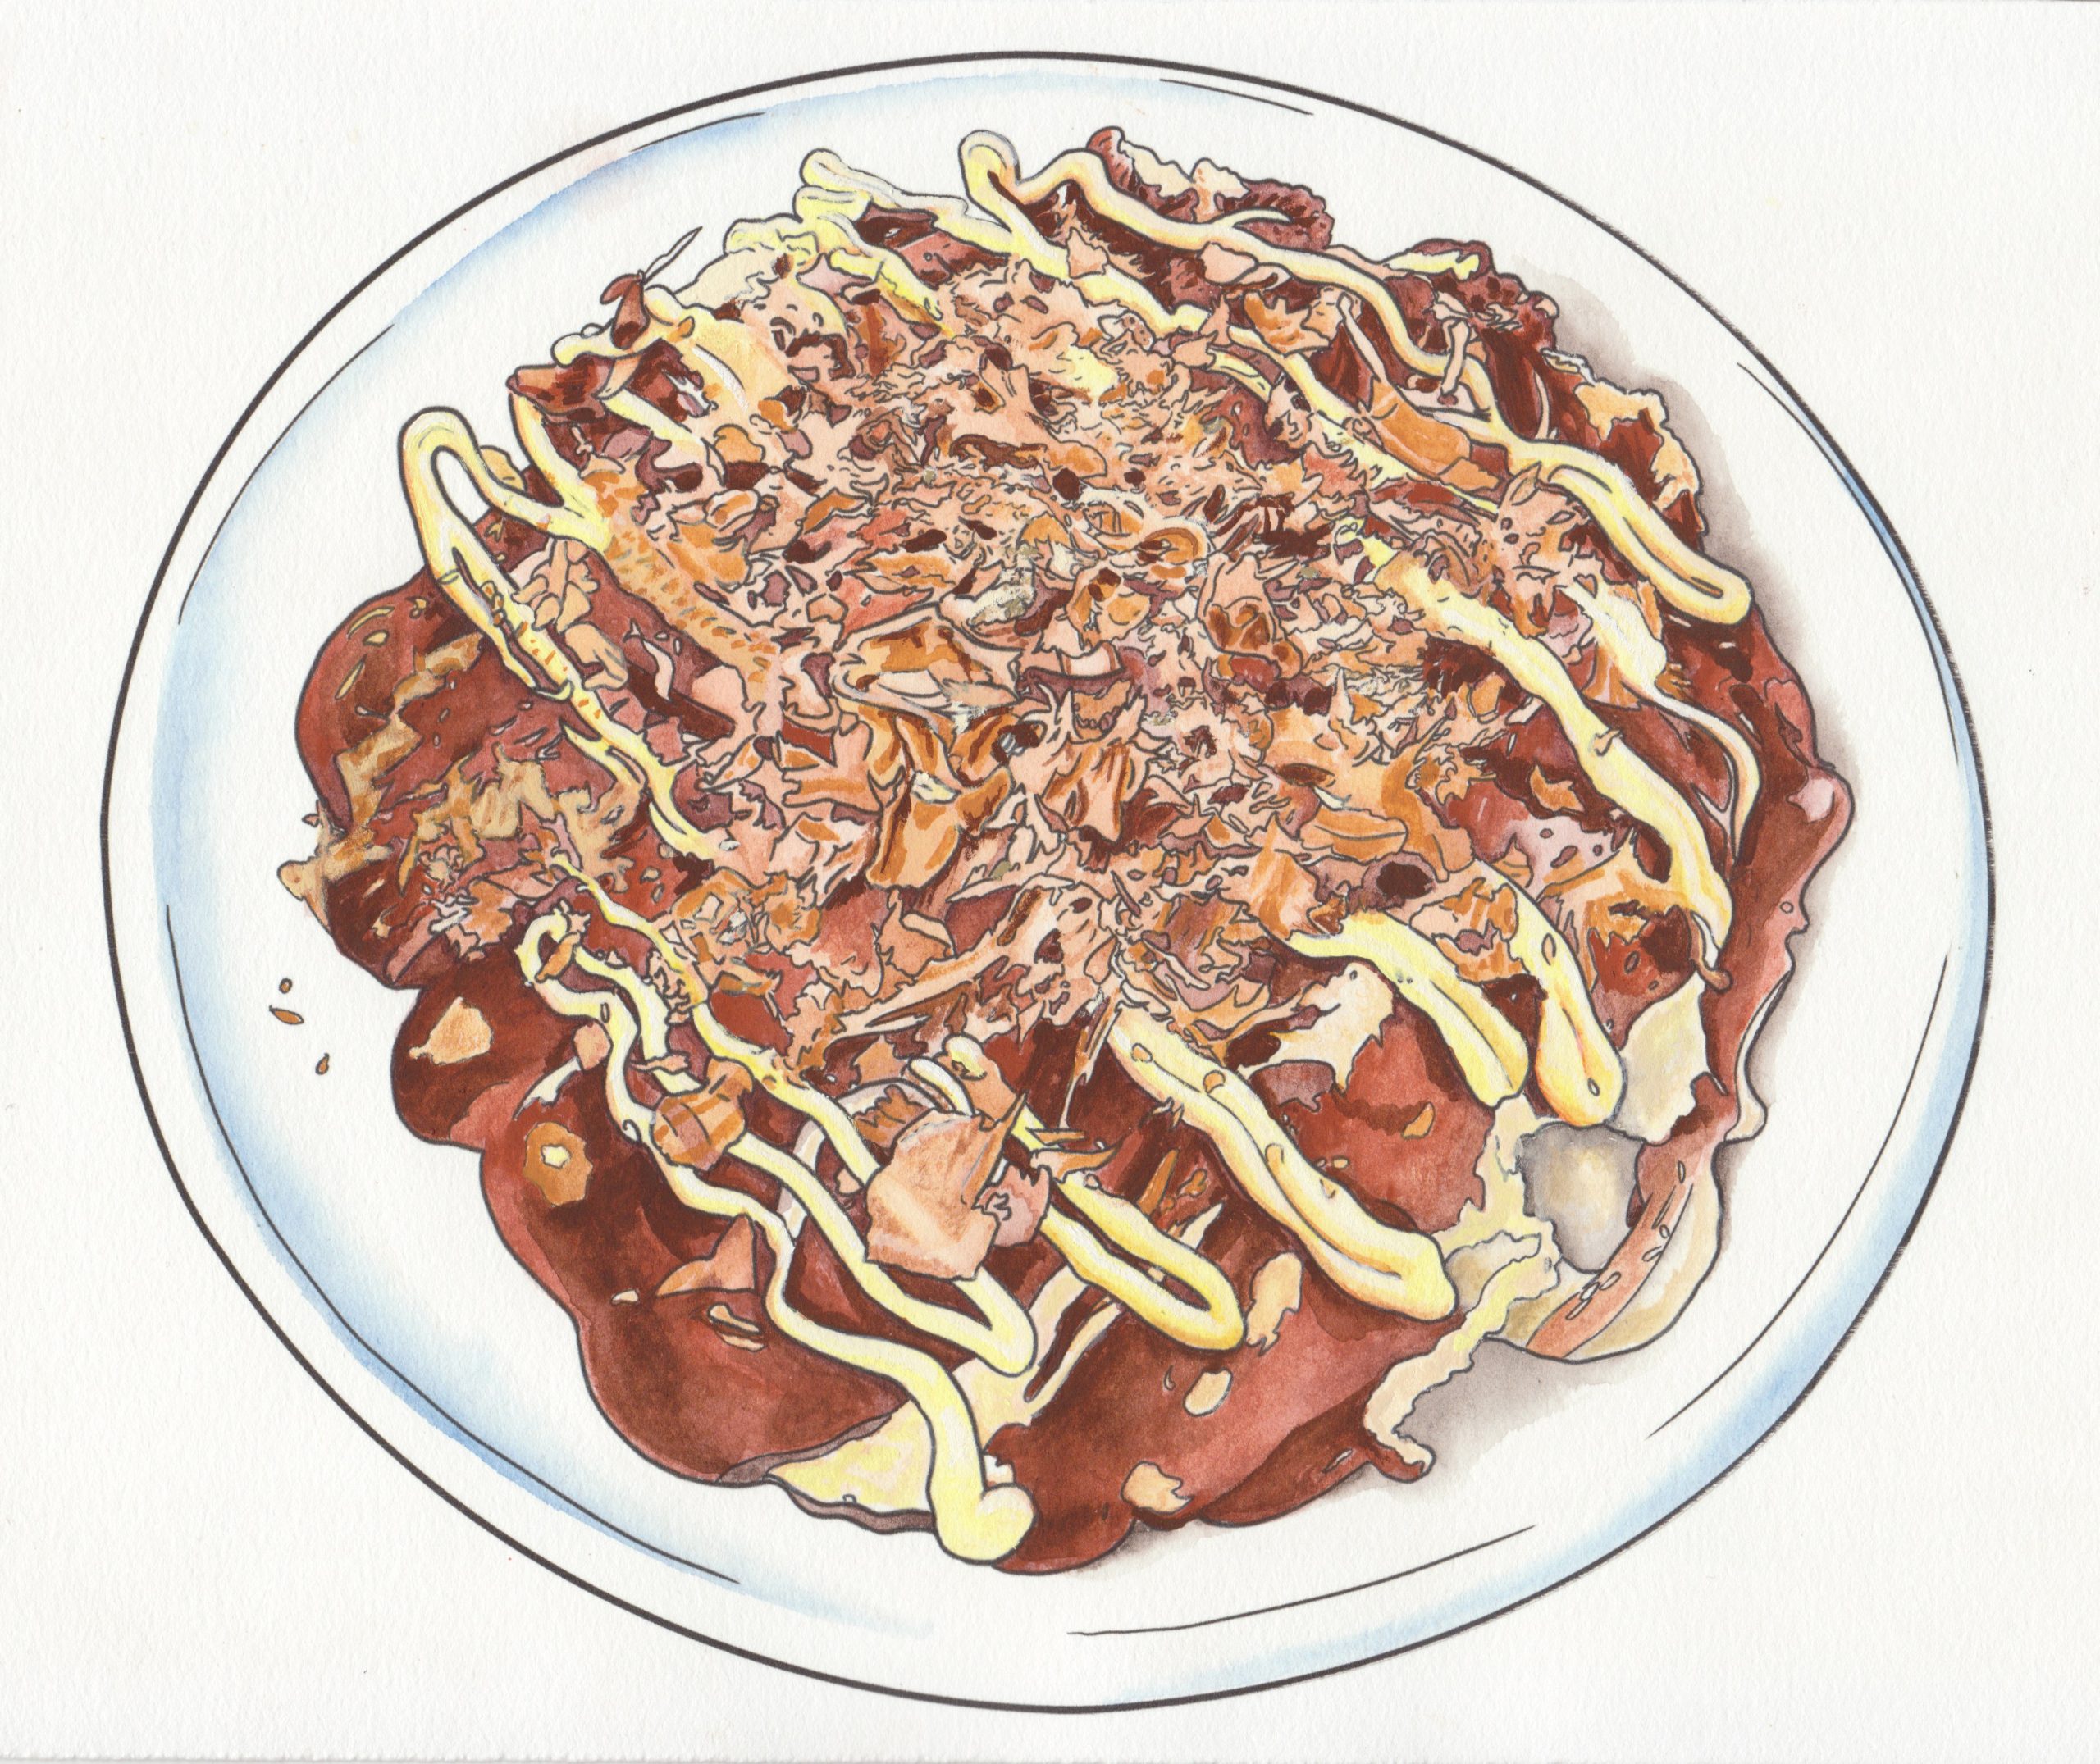 A round white plate is filled with Okonomiyaki in this horizontally oriented overhead view. The plate has been drawn in black contour lines with subtle blue washes for the shadows. The background is the white of the paper. The Okonomiyaki is drawn in contour and then filled with brown, tan, and cream watercolor washes with details in gauche. The fried batter of the Okonomiyaki peeks out from underneath the dripping brown sauce. The dish is has a thick zig-zag of Japanese mayo running across the top and then a heap of bonito flakes on top. The bonito flakes create a busy and chaotic textural focus to this painting.